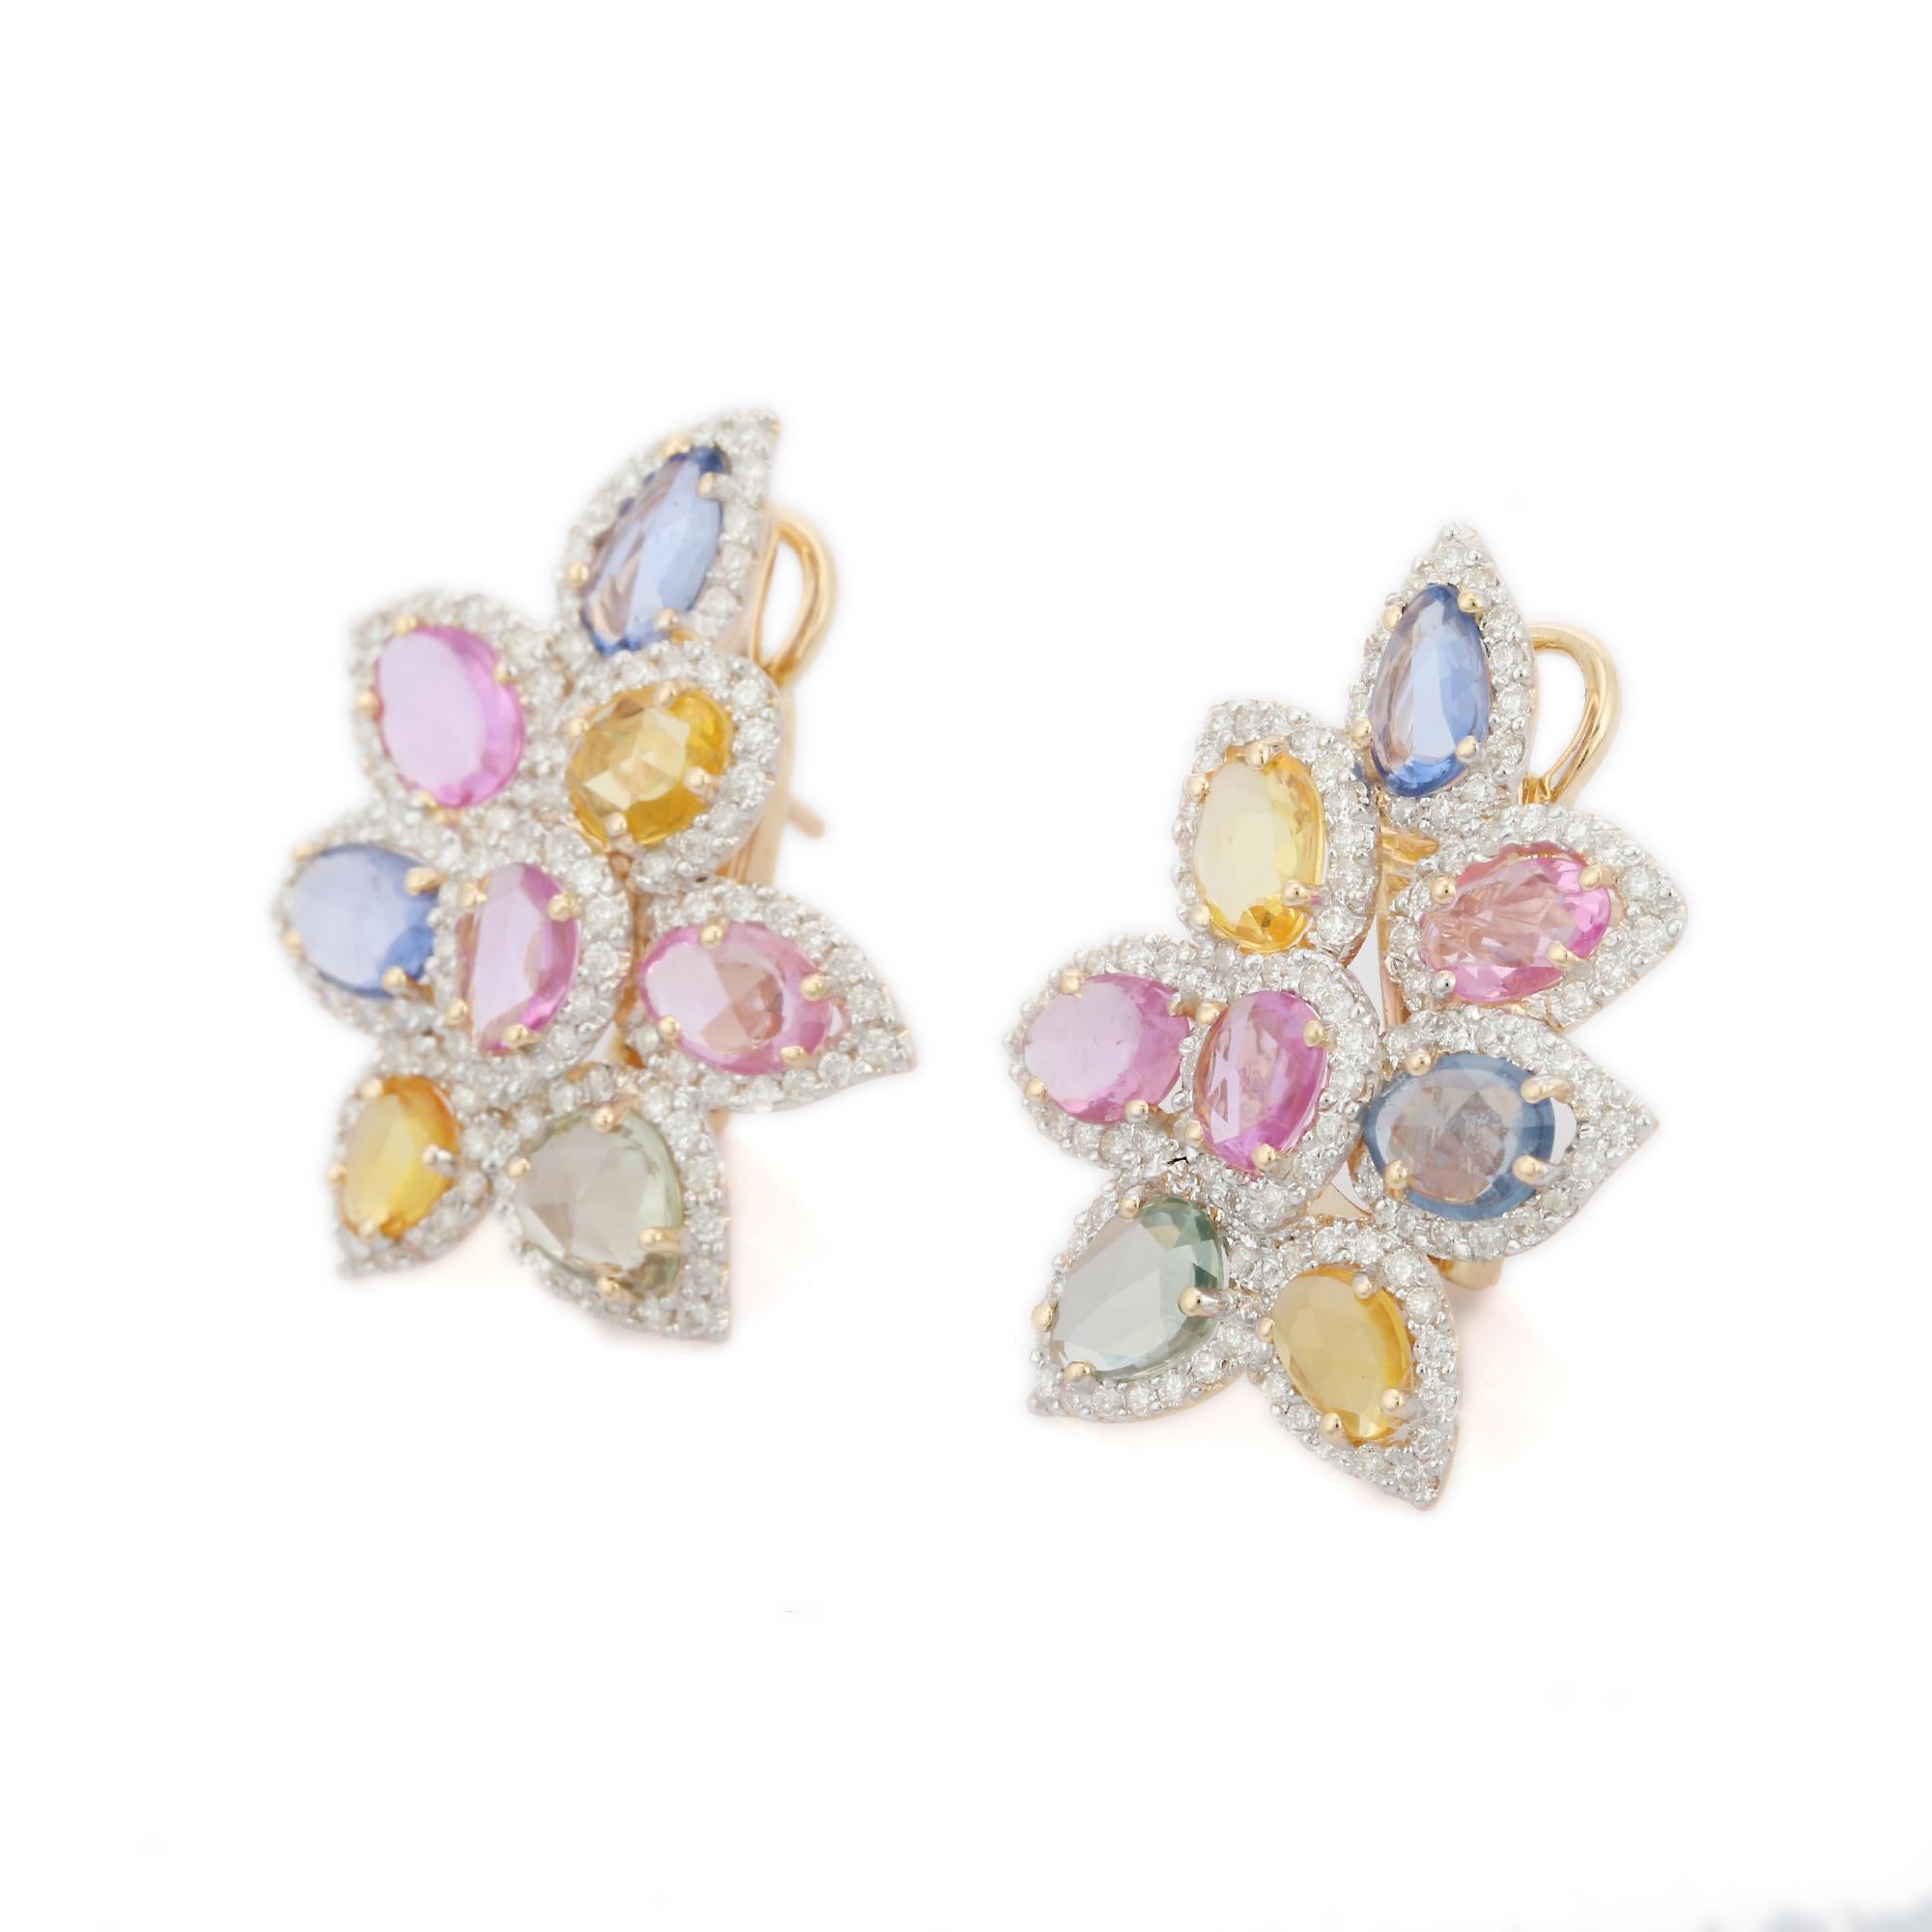 Multi Sapphire and Diamond Studded Floral Stud Earrings in 14K Gold to make a statement with your look. You shall need stud earrings to make a statement with your look. These earrings create a sparkling, luxurious look featuring uneven cut multi